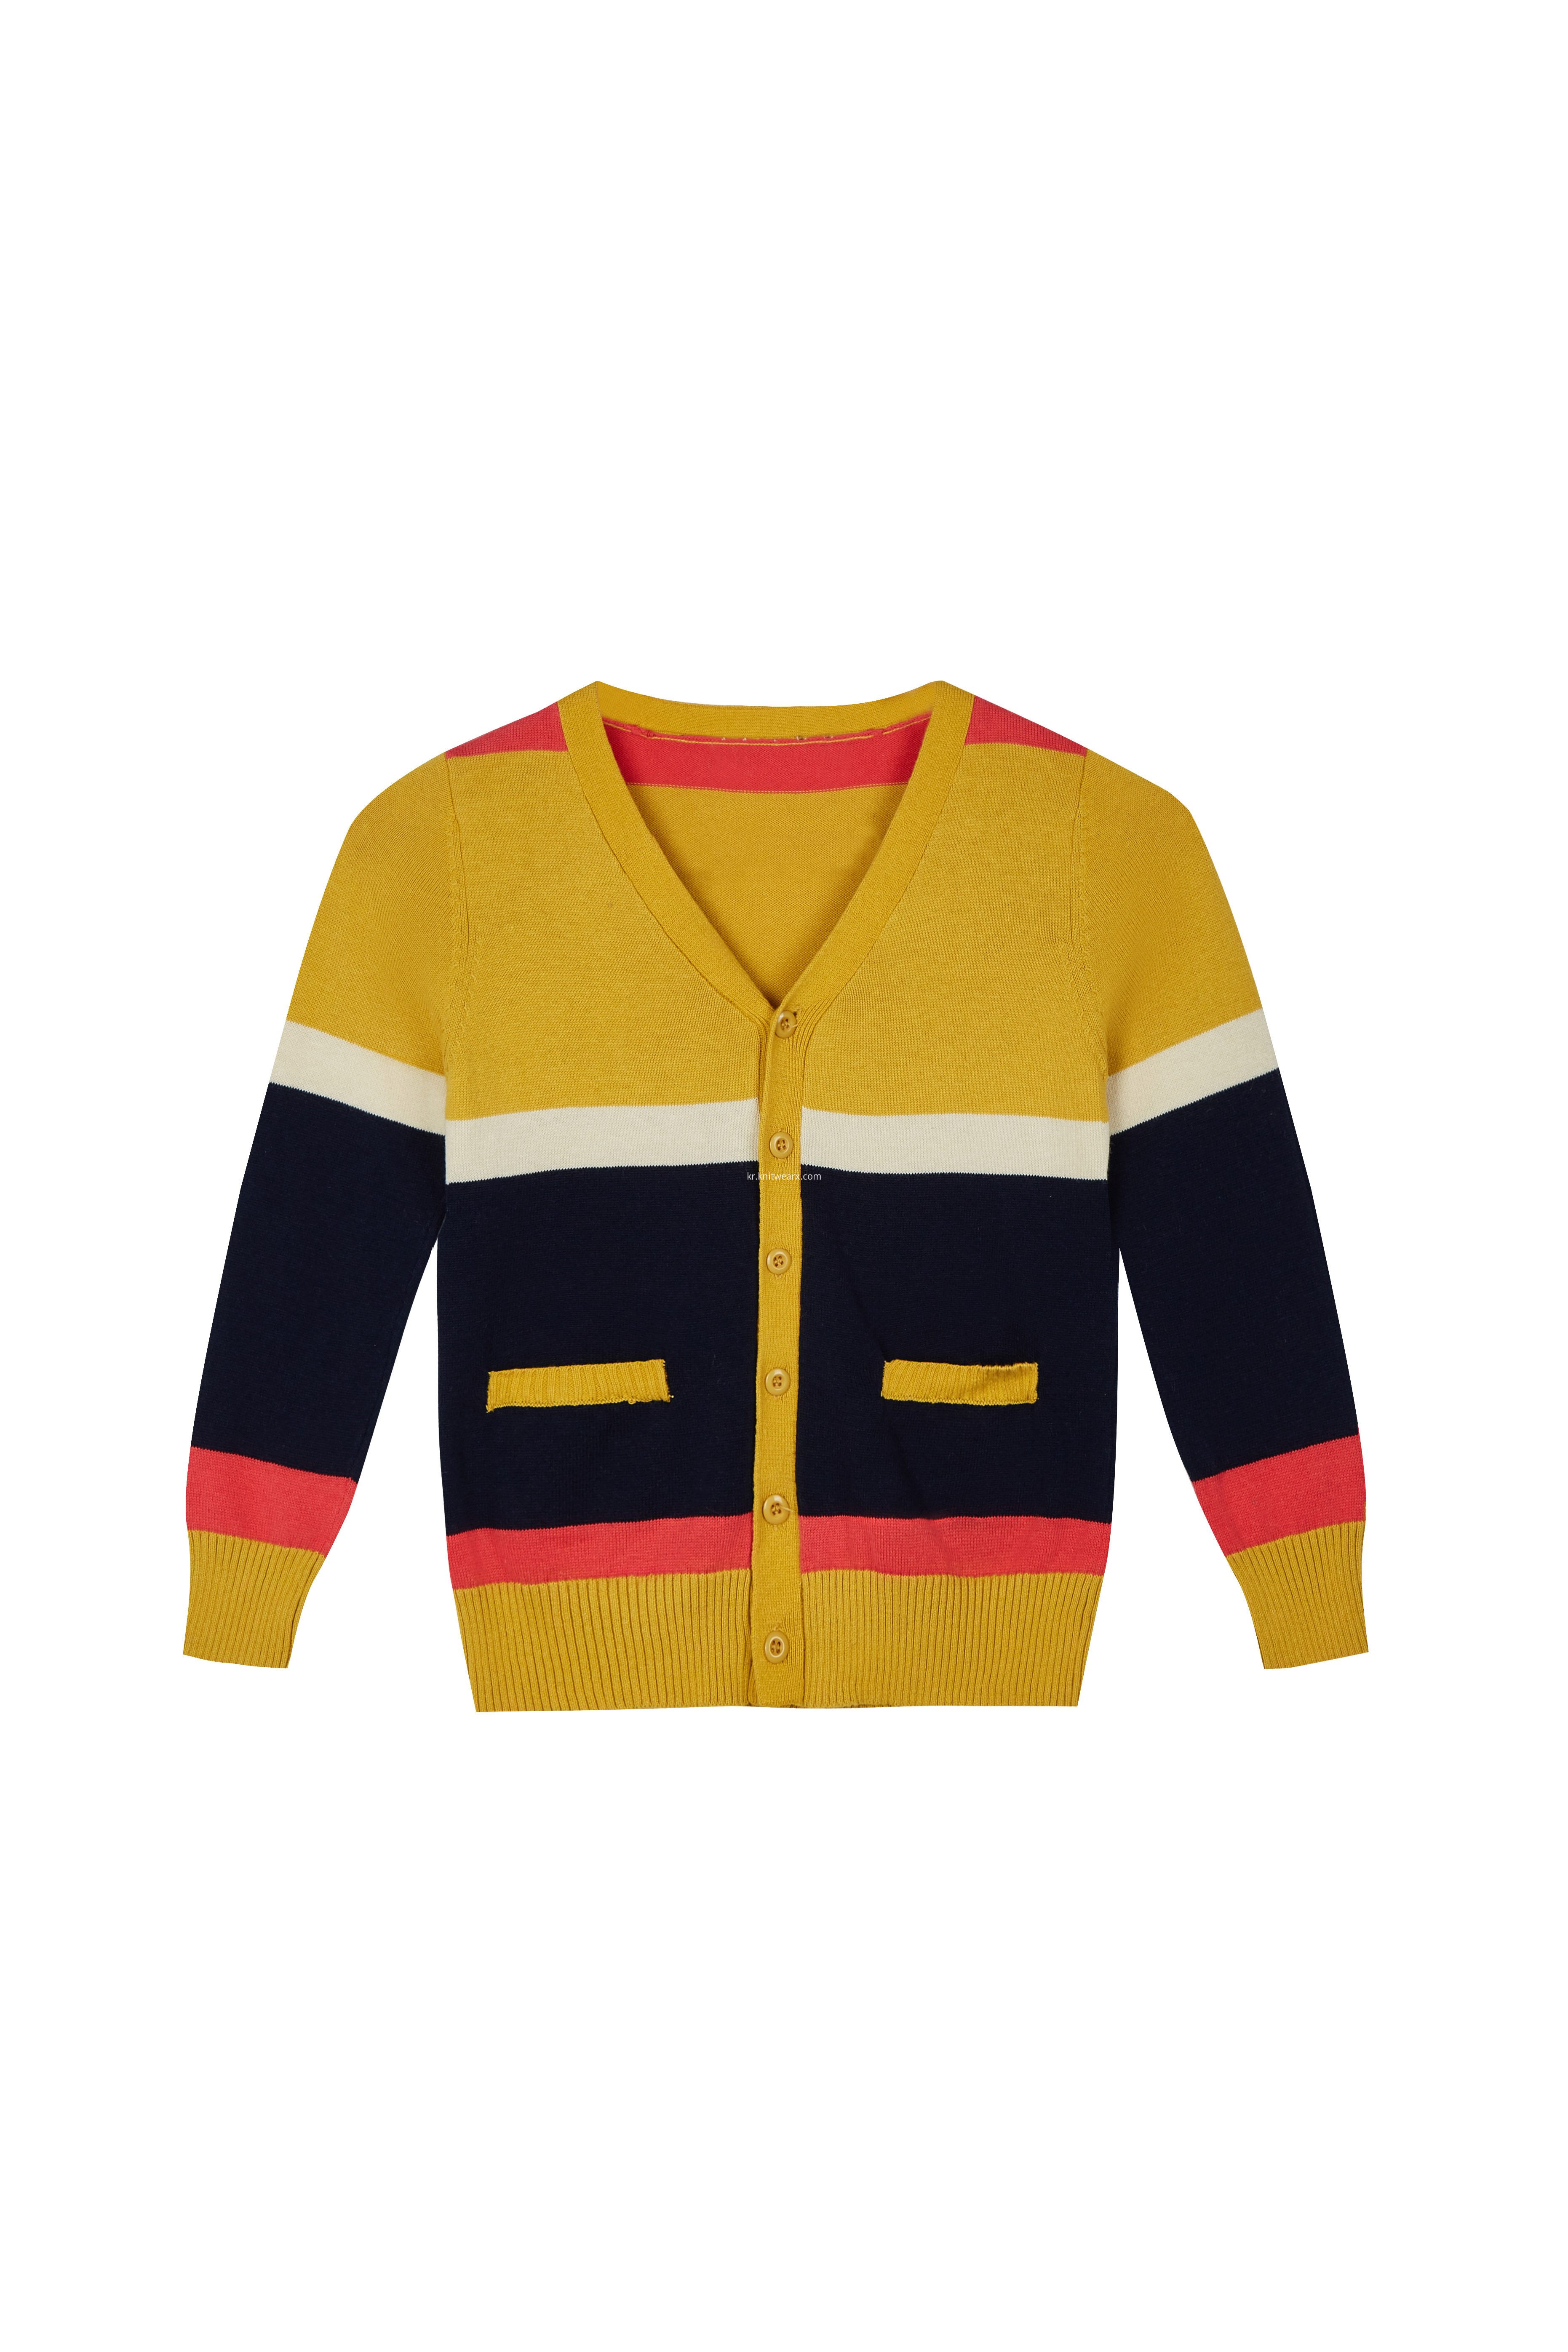 Boy's Knitted Bright Stripes Buttoned Pocket Cardigan